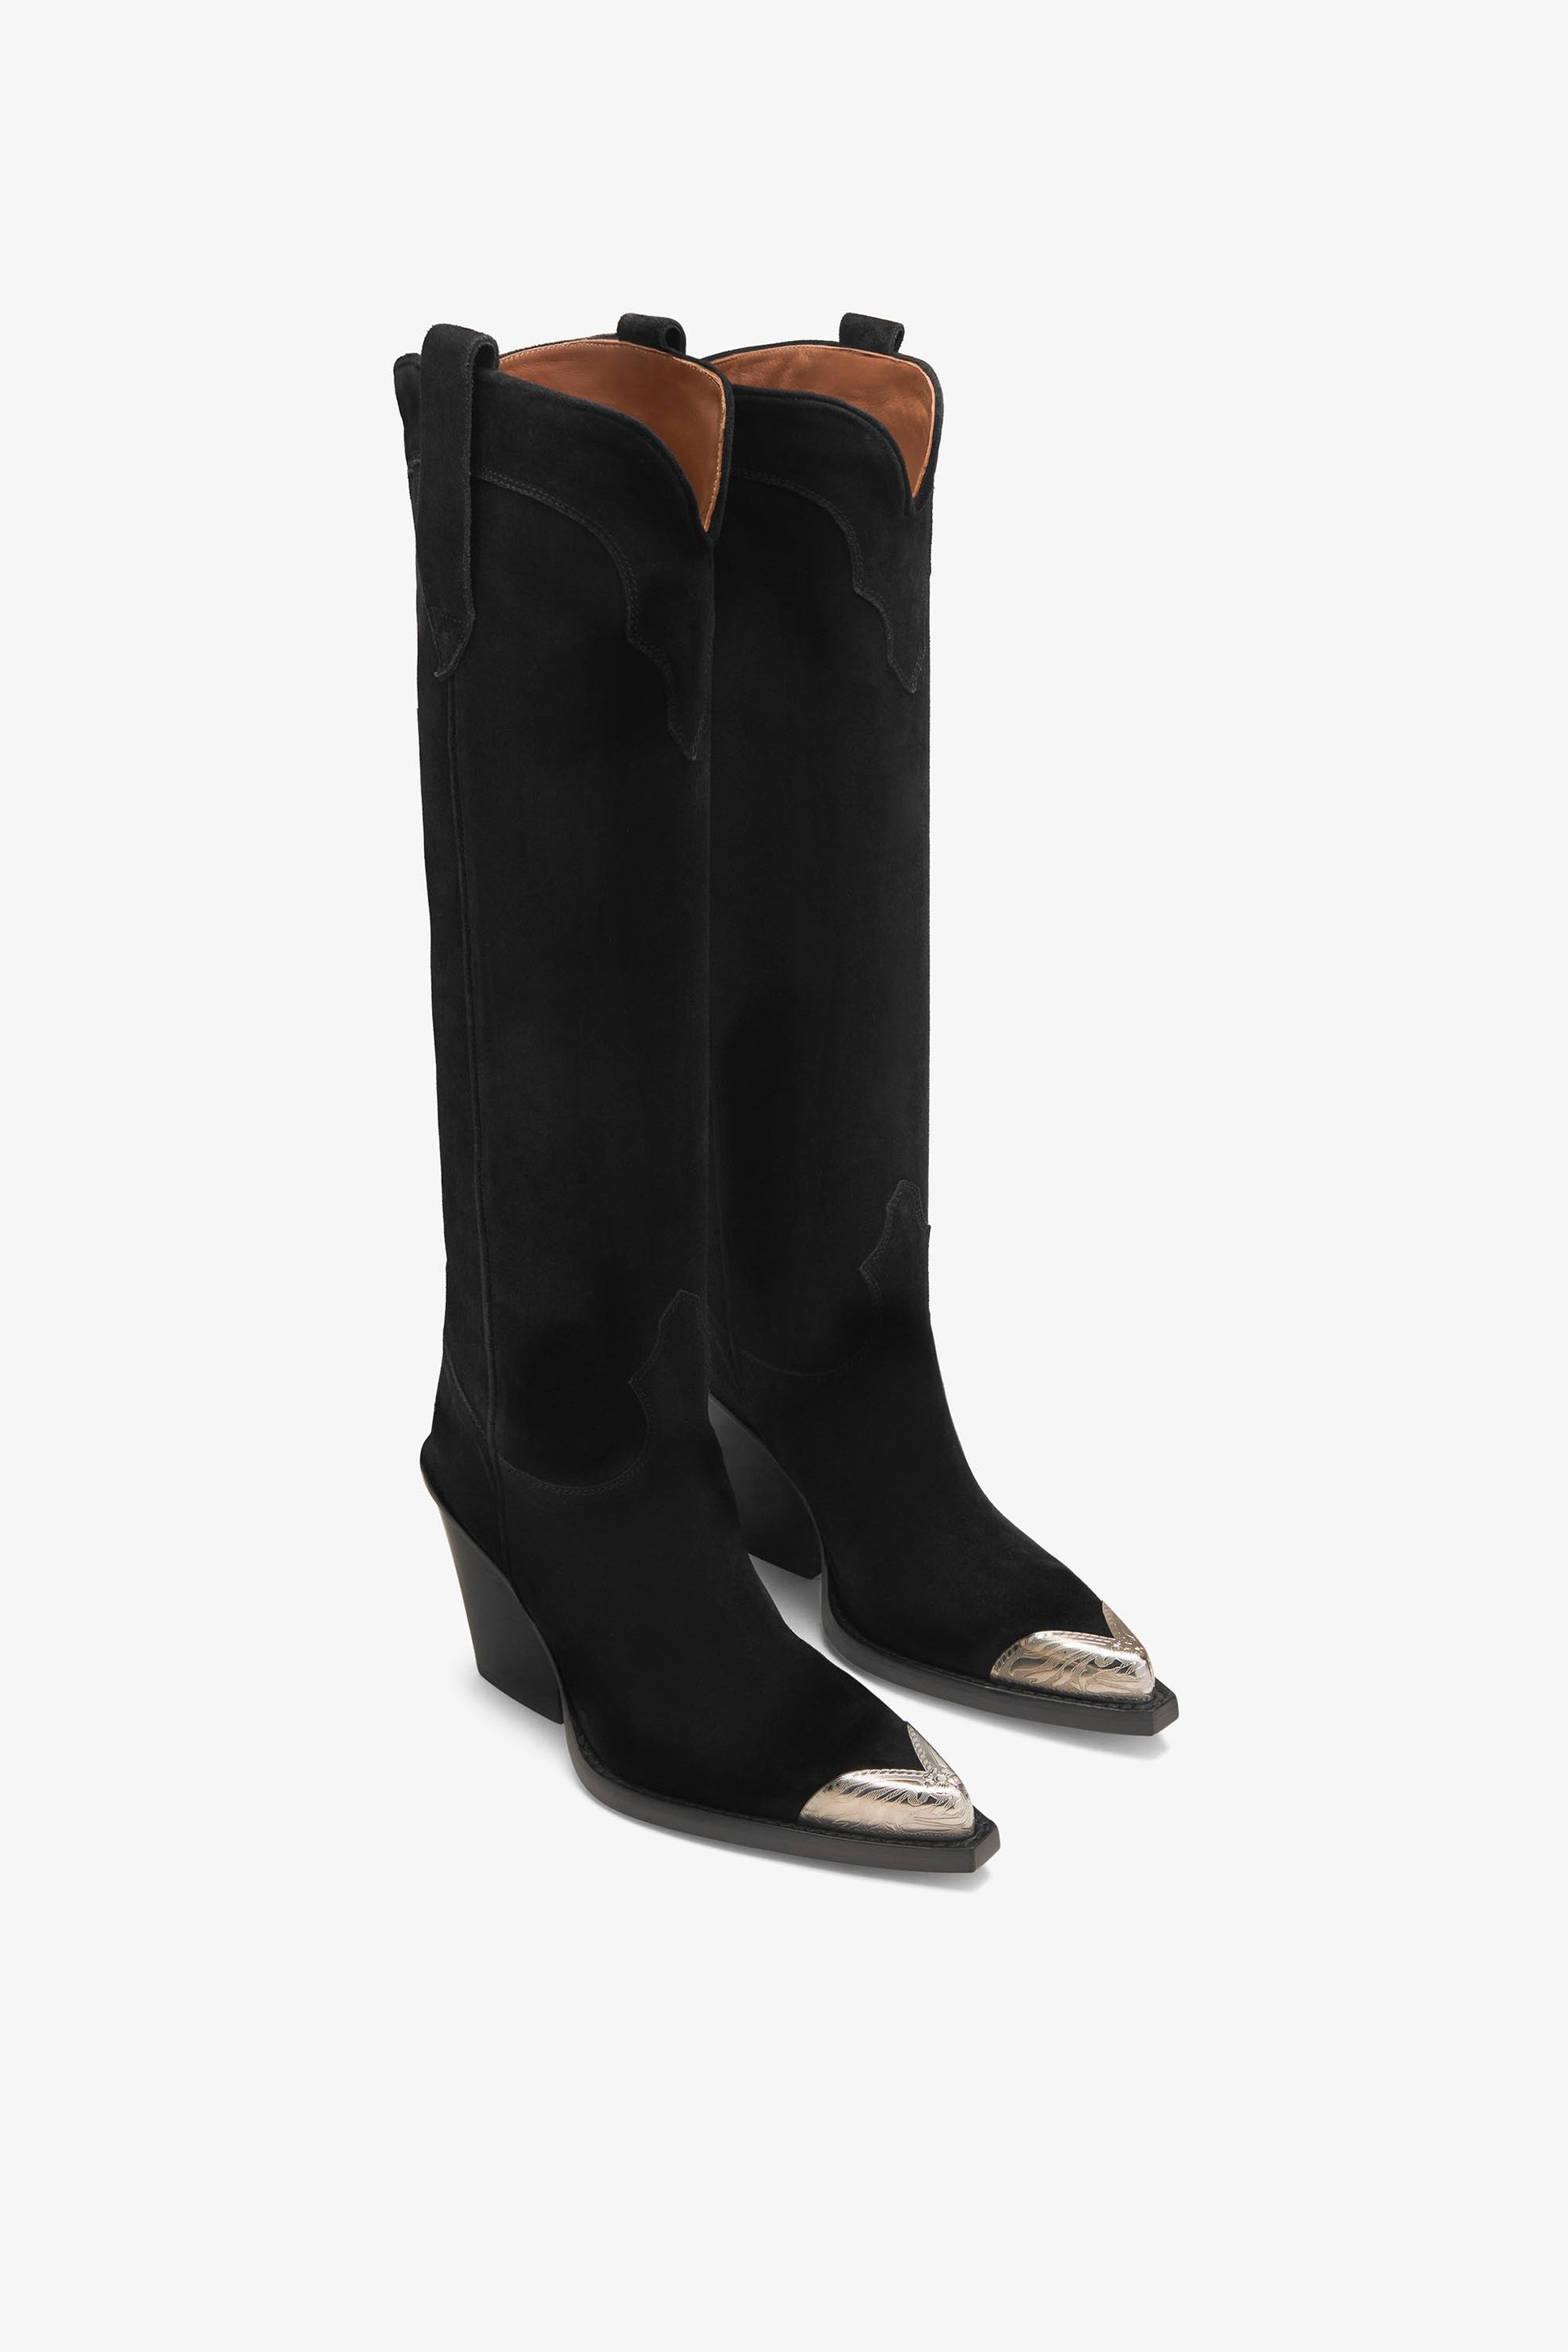 Off black calf suede boots with metallic toe